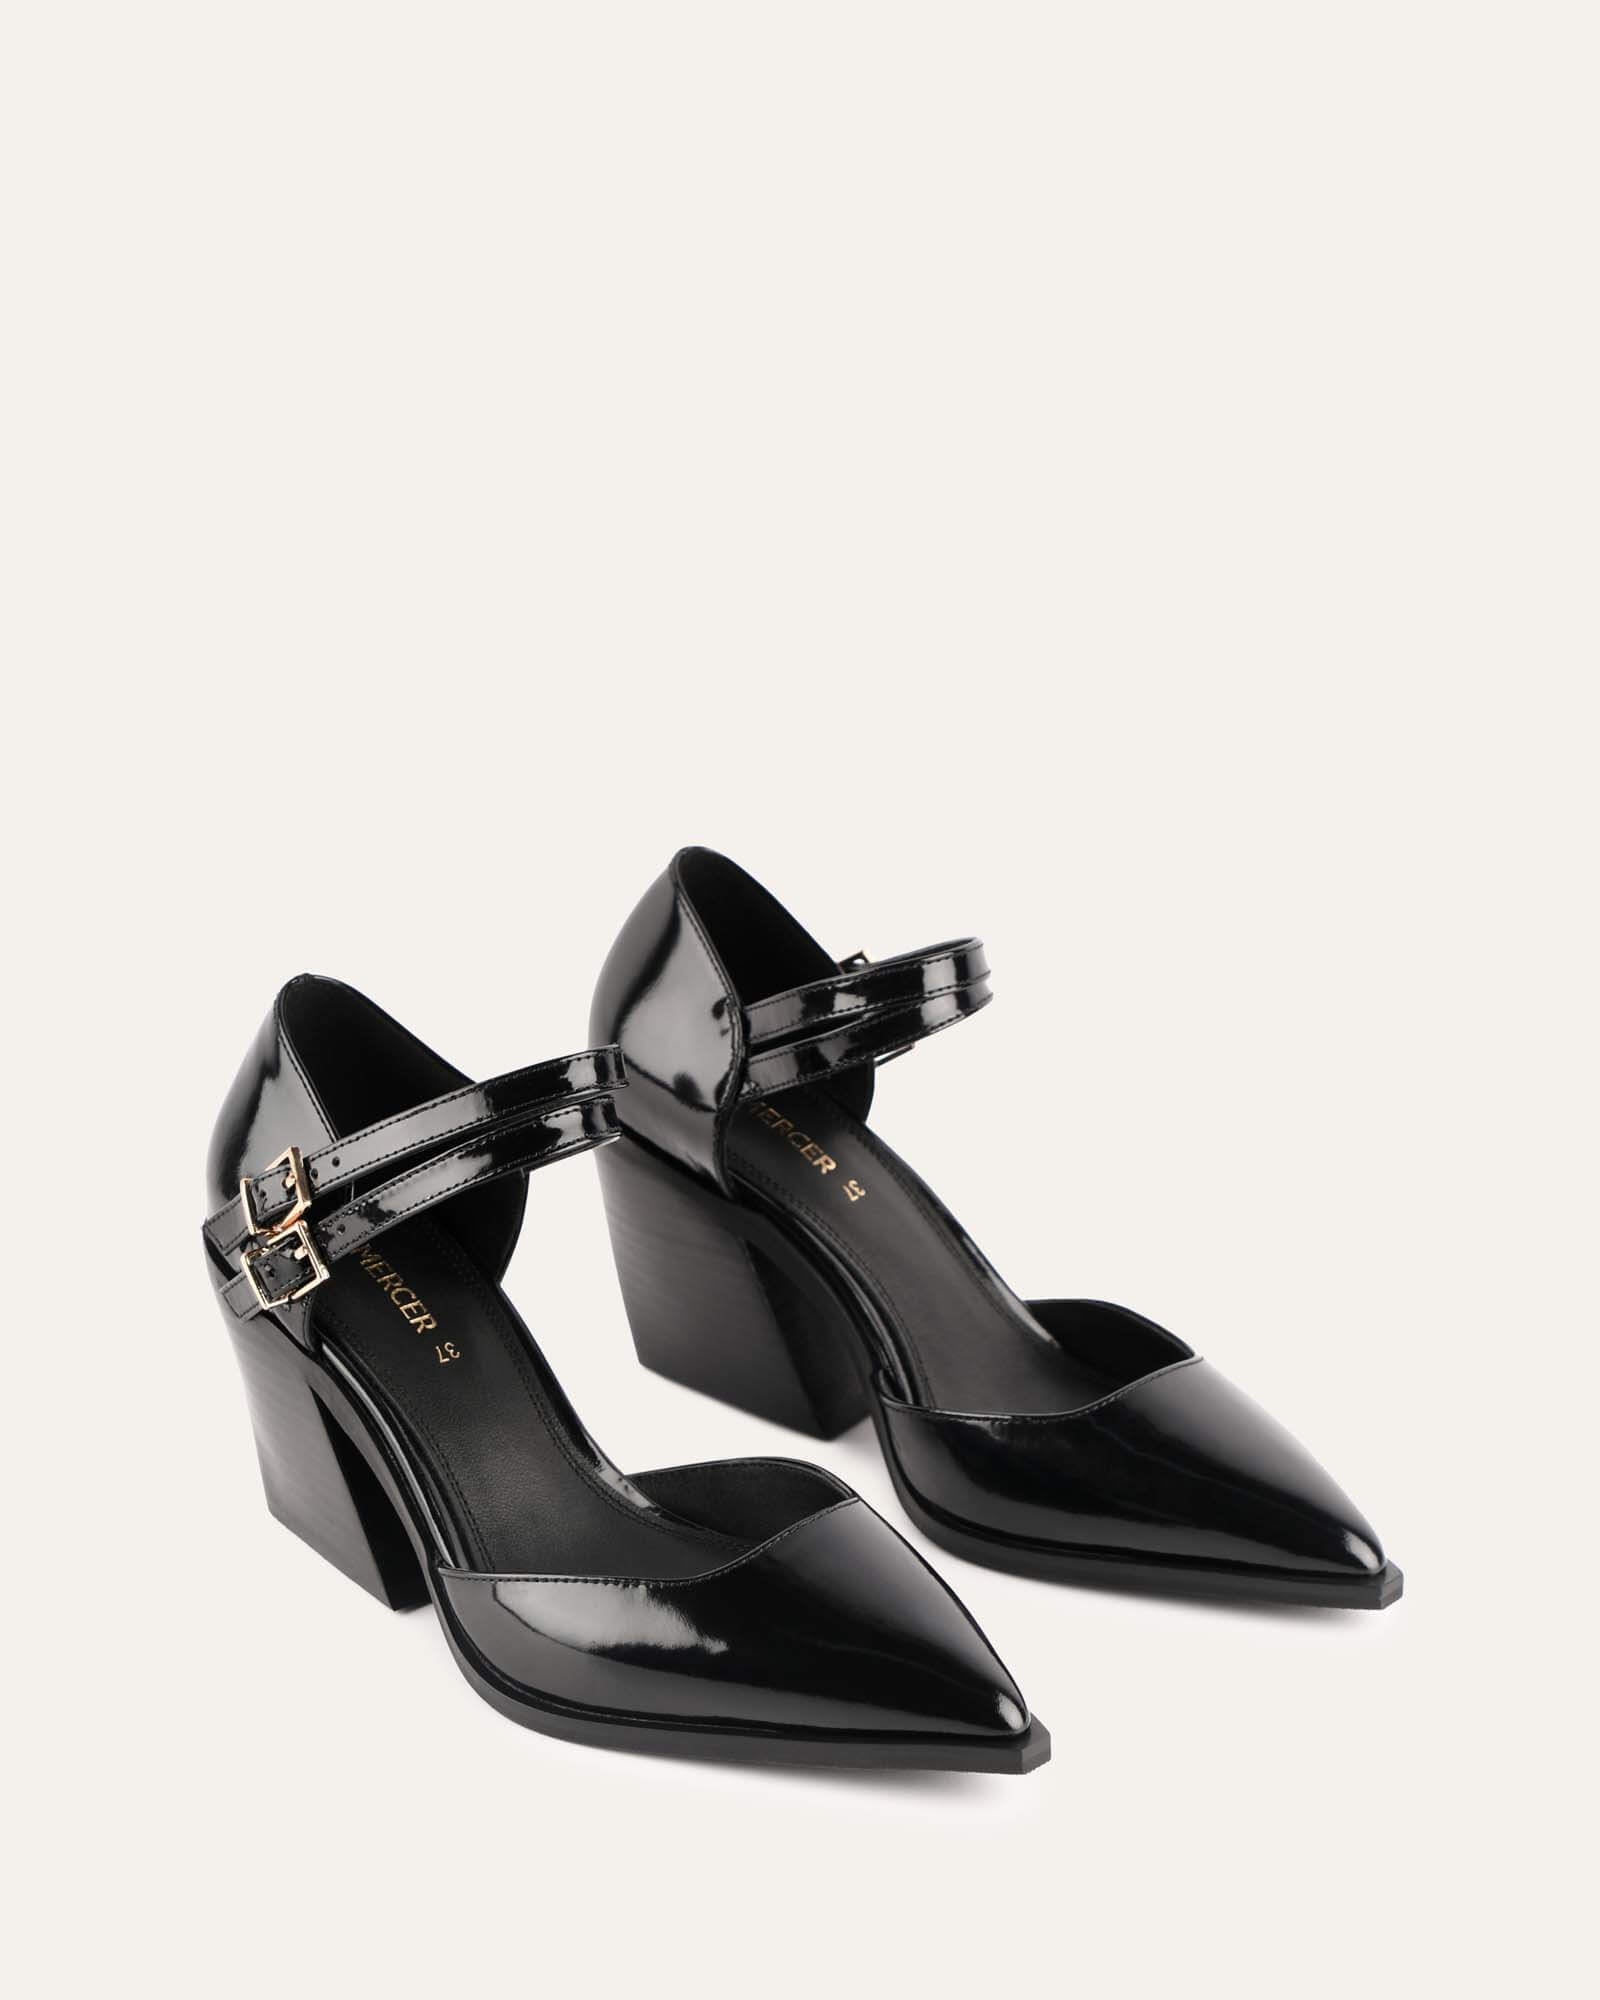 Designer Genuine Leather Mid Heel Pump Small Heel Sandals With Metal Chain  Womens 75MM Slingback Dress Shoes In Square Toe NO273 From Beatshoes,  $45.35 | DHgate.Com